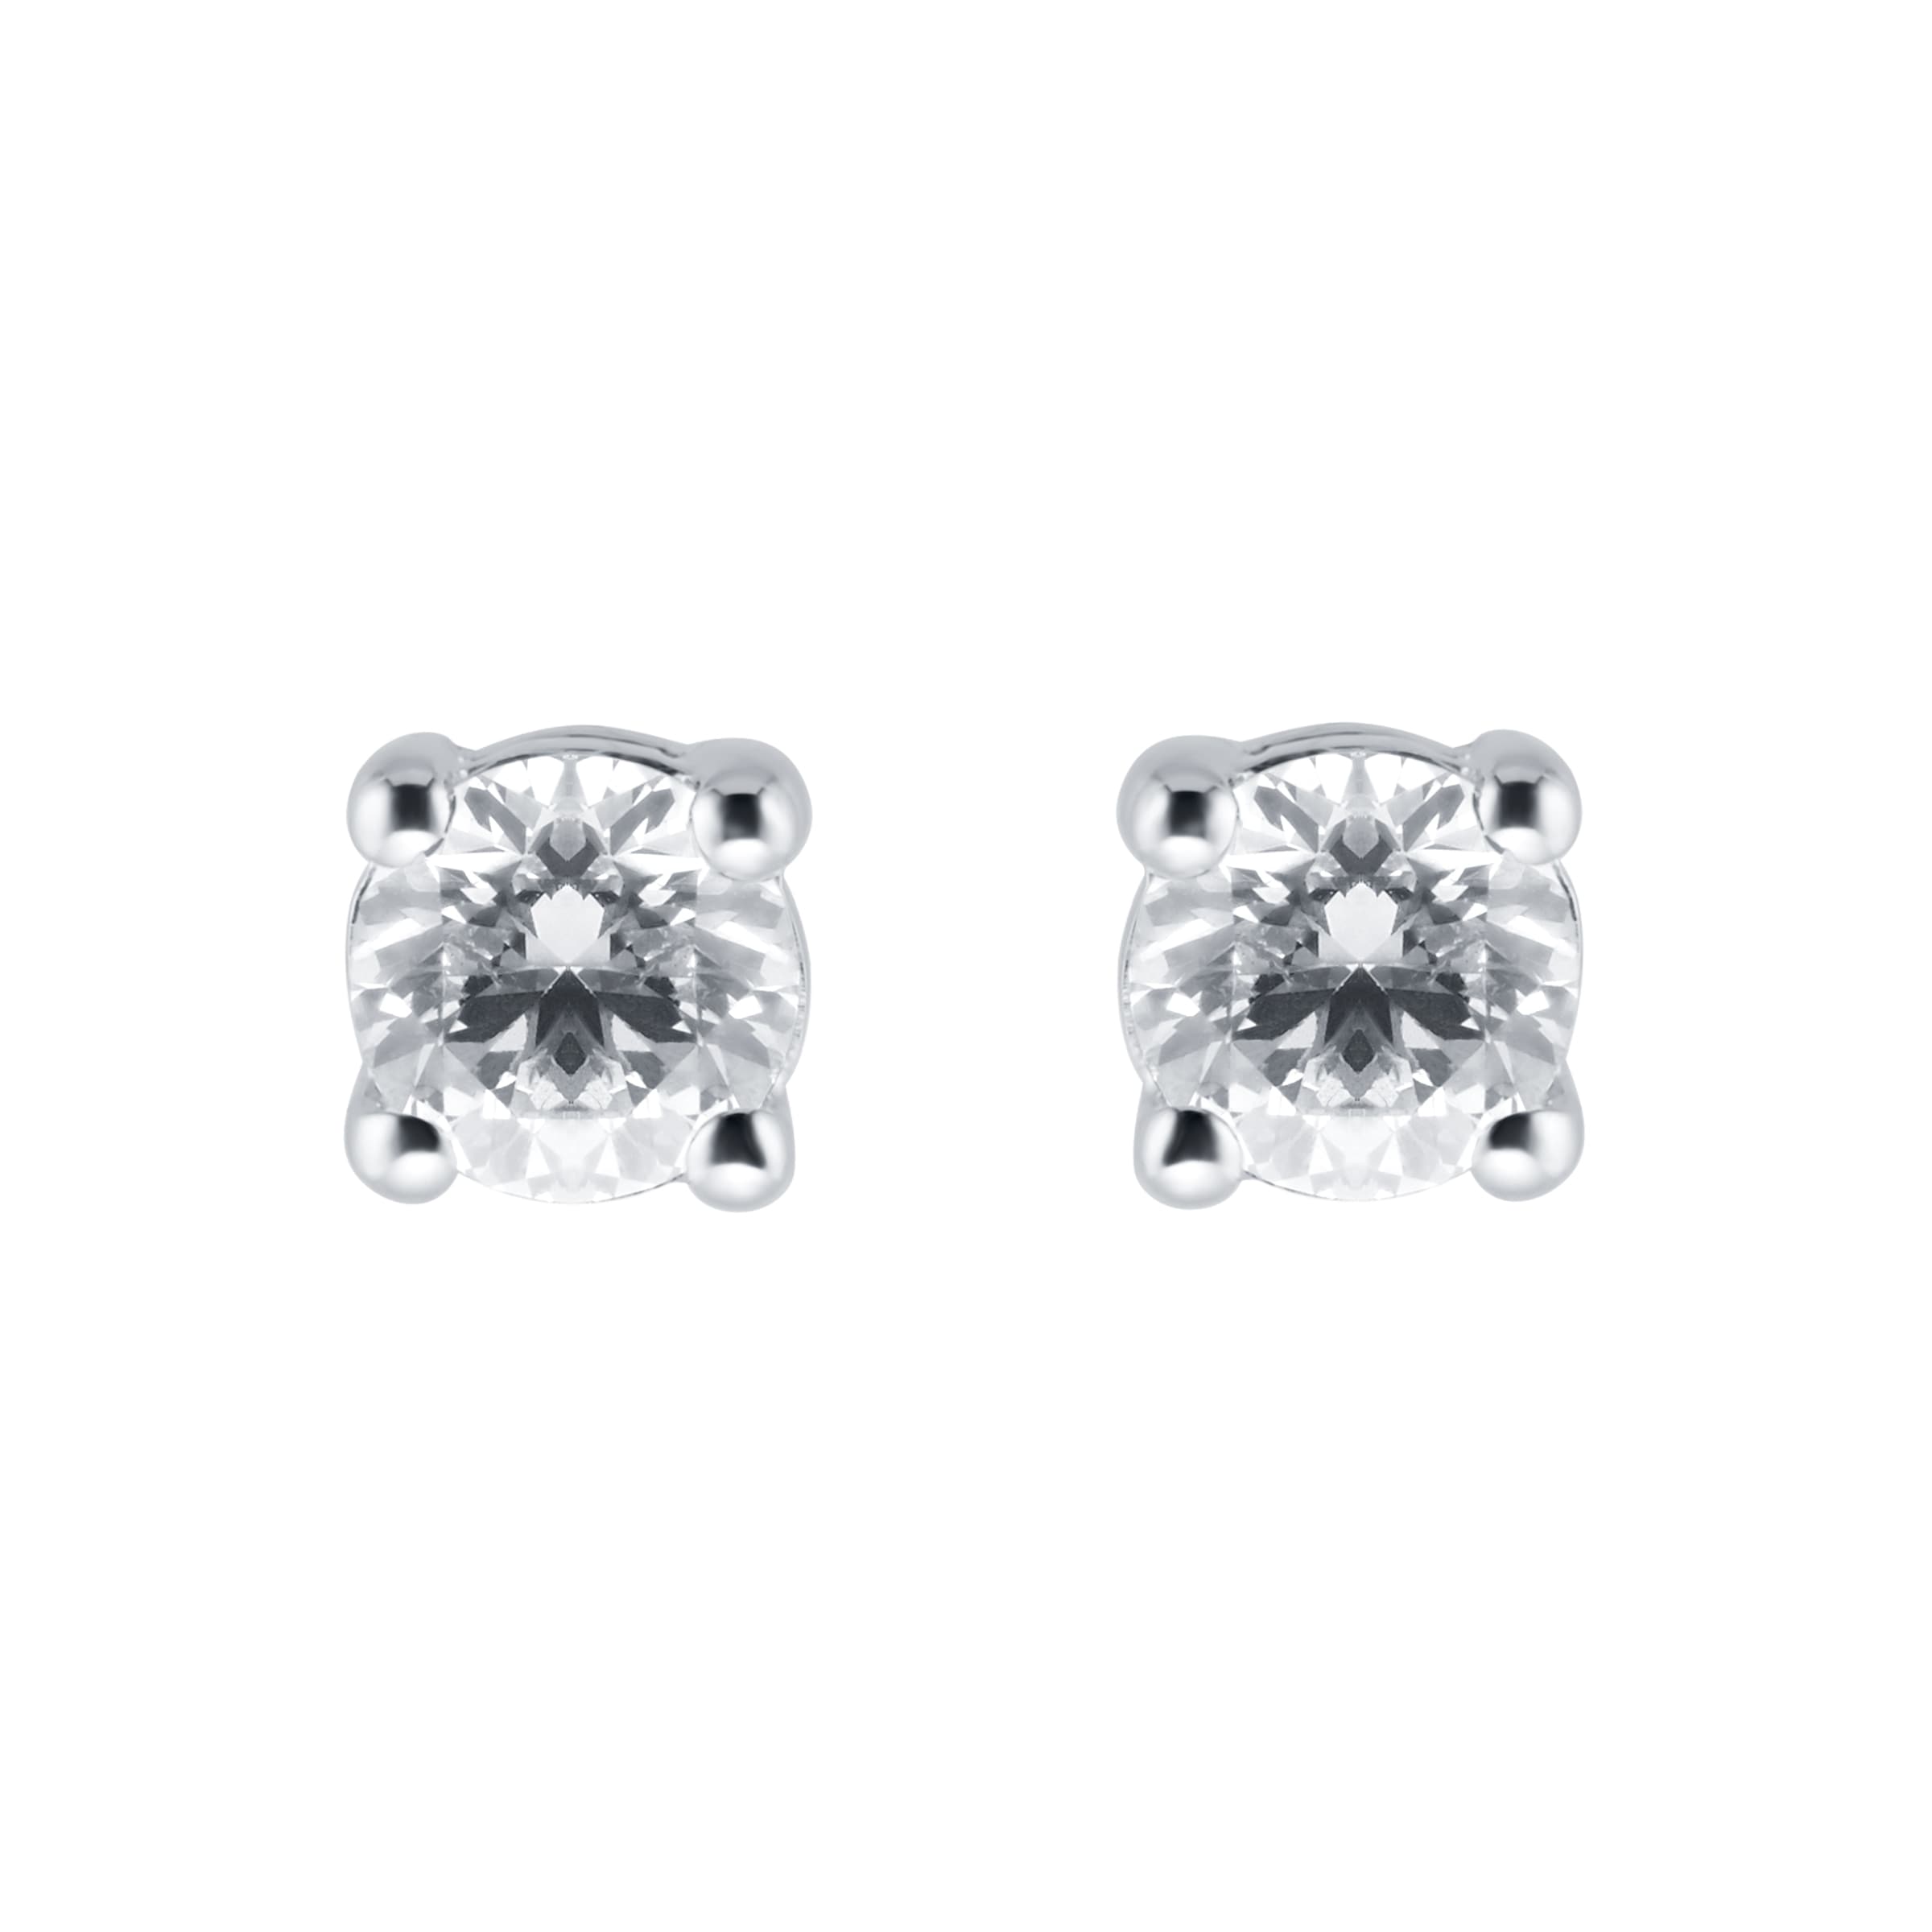 9ct White Gold 6mm Cubic Zirconia Stud Earrings